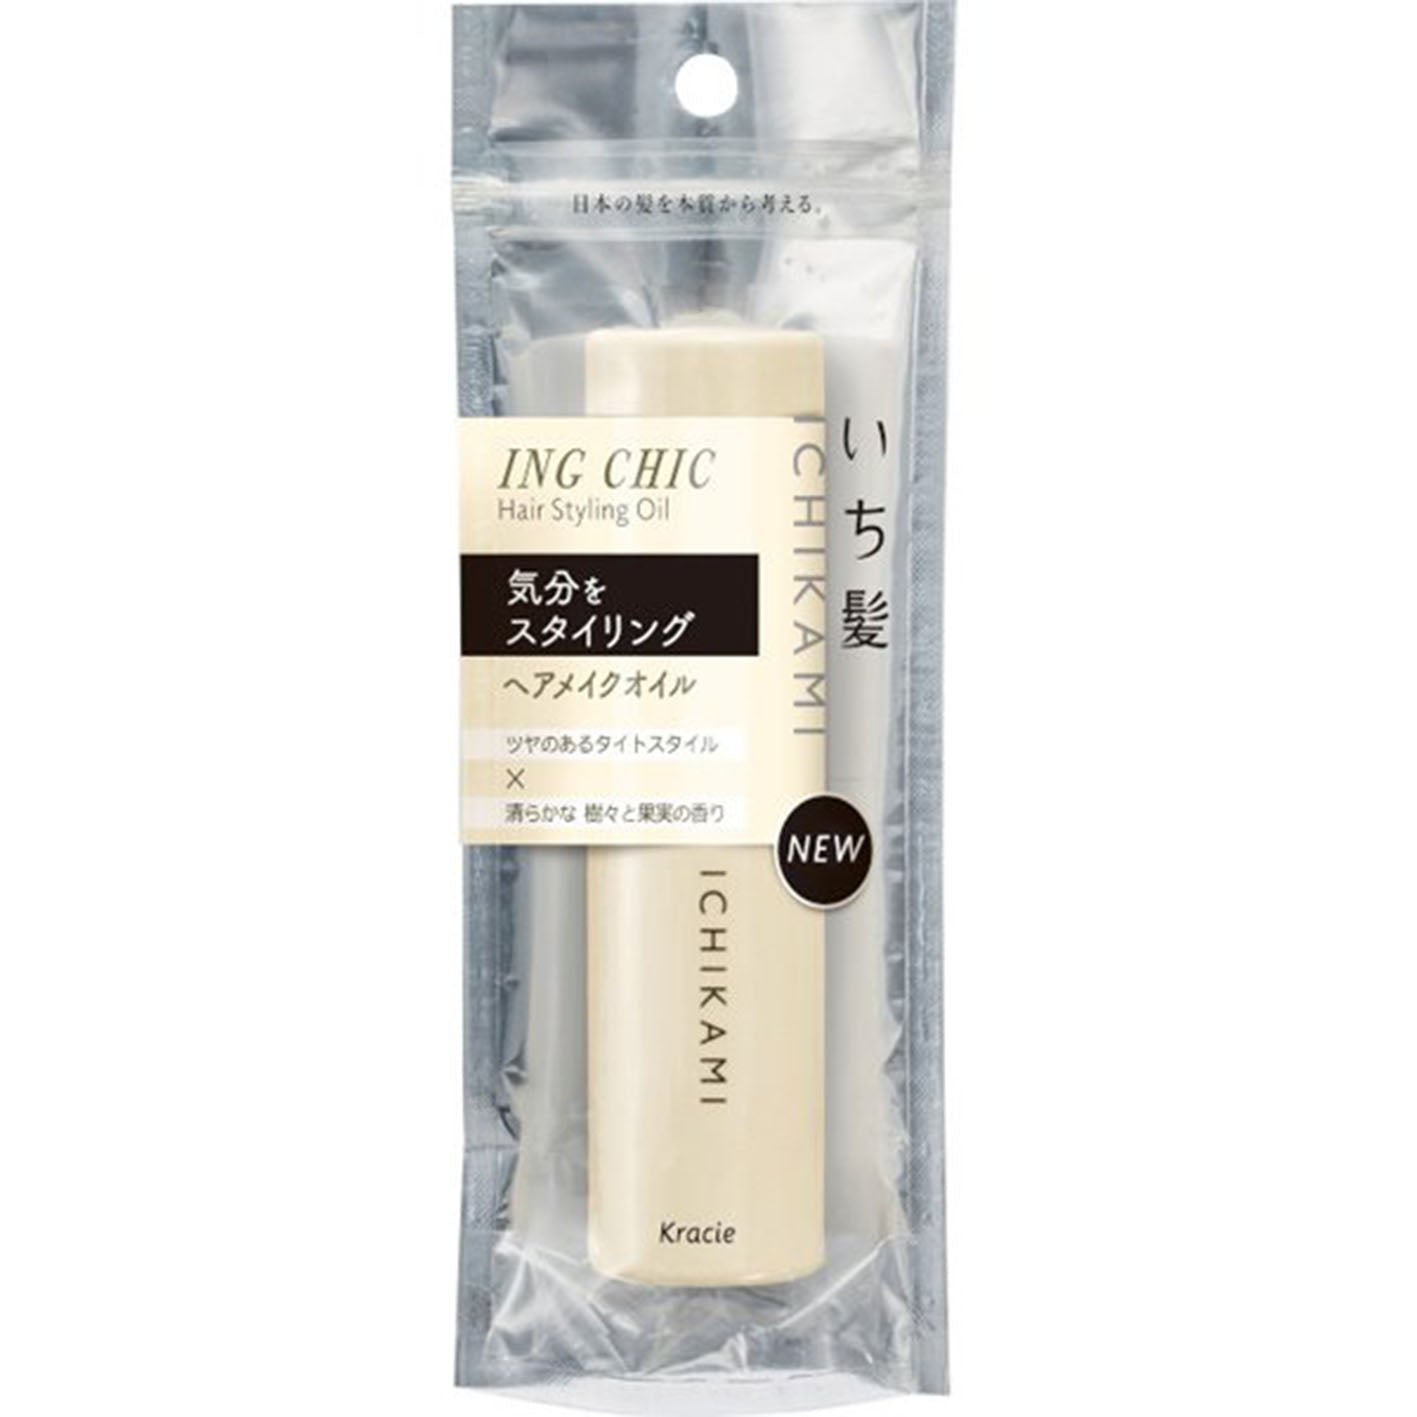 Ichikami ING CHIC Hair Makeup Oil 28ml - Harajuku Culture Japan - Japanease Products Store Beauty and Stationery